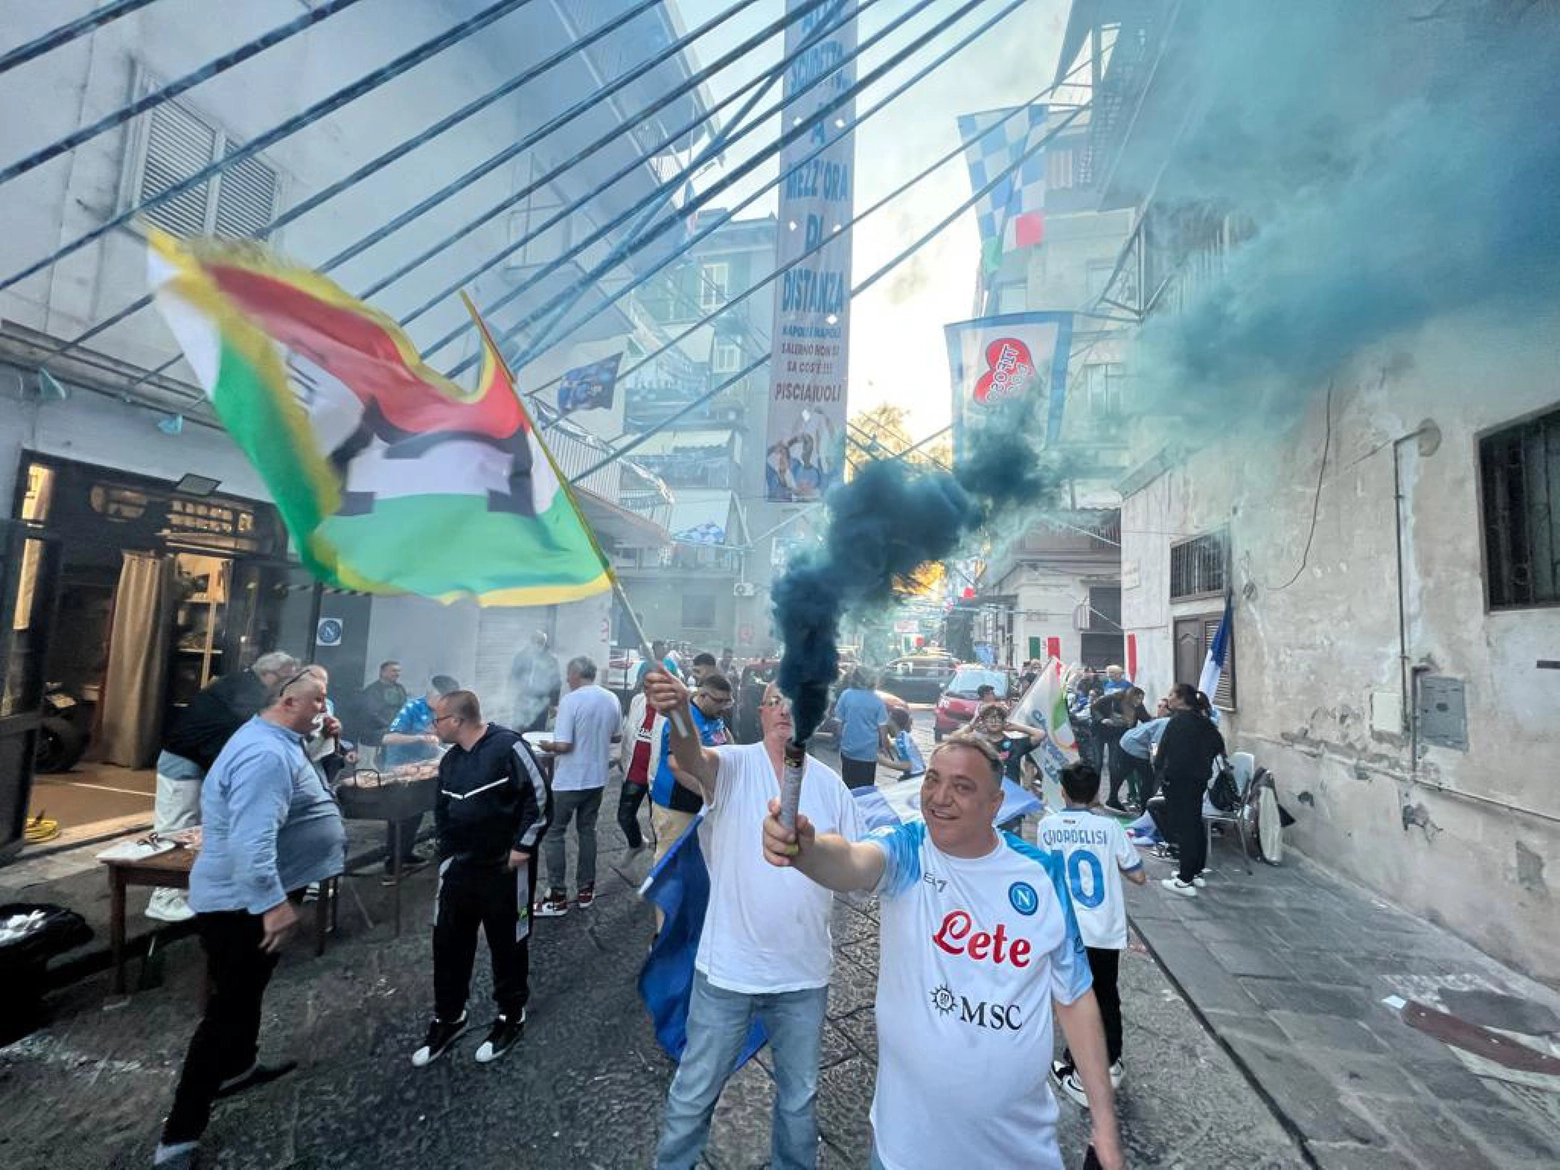 SSC Napoli’s supporters wait for the Italian Serie A soccer match against Udinese Calcio in the centre of Naples, Italy, 04 May 2023.
ANSA